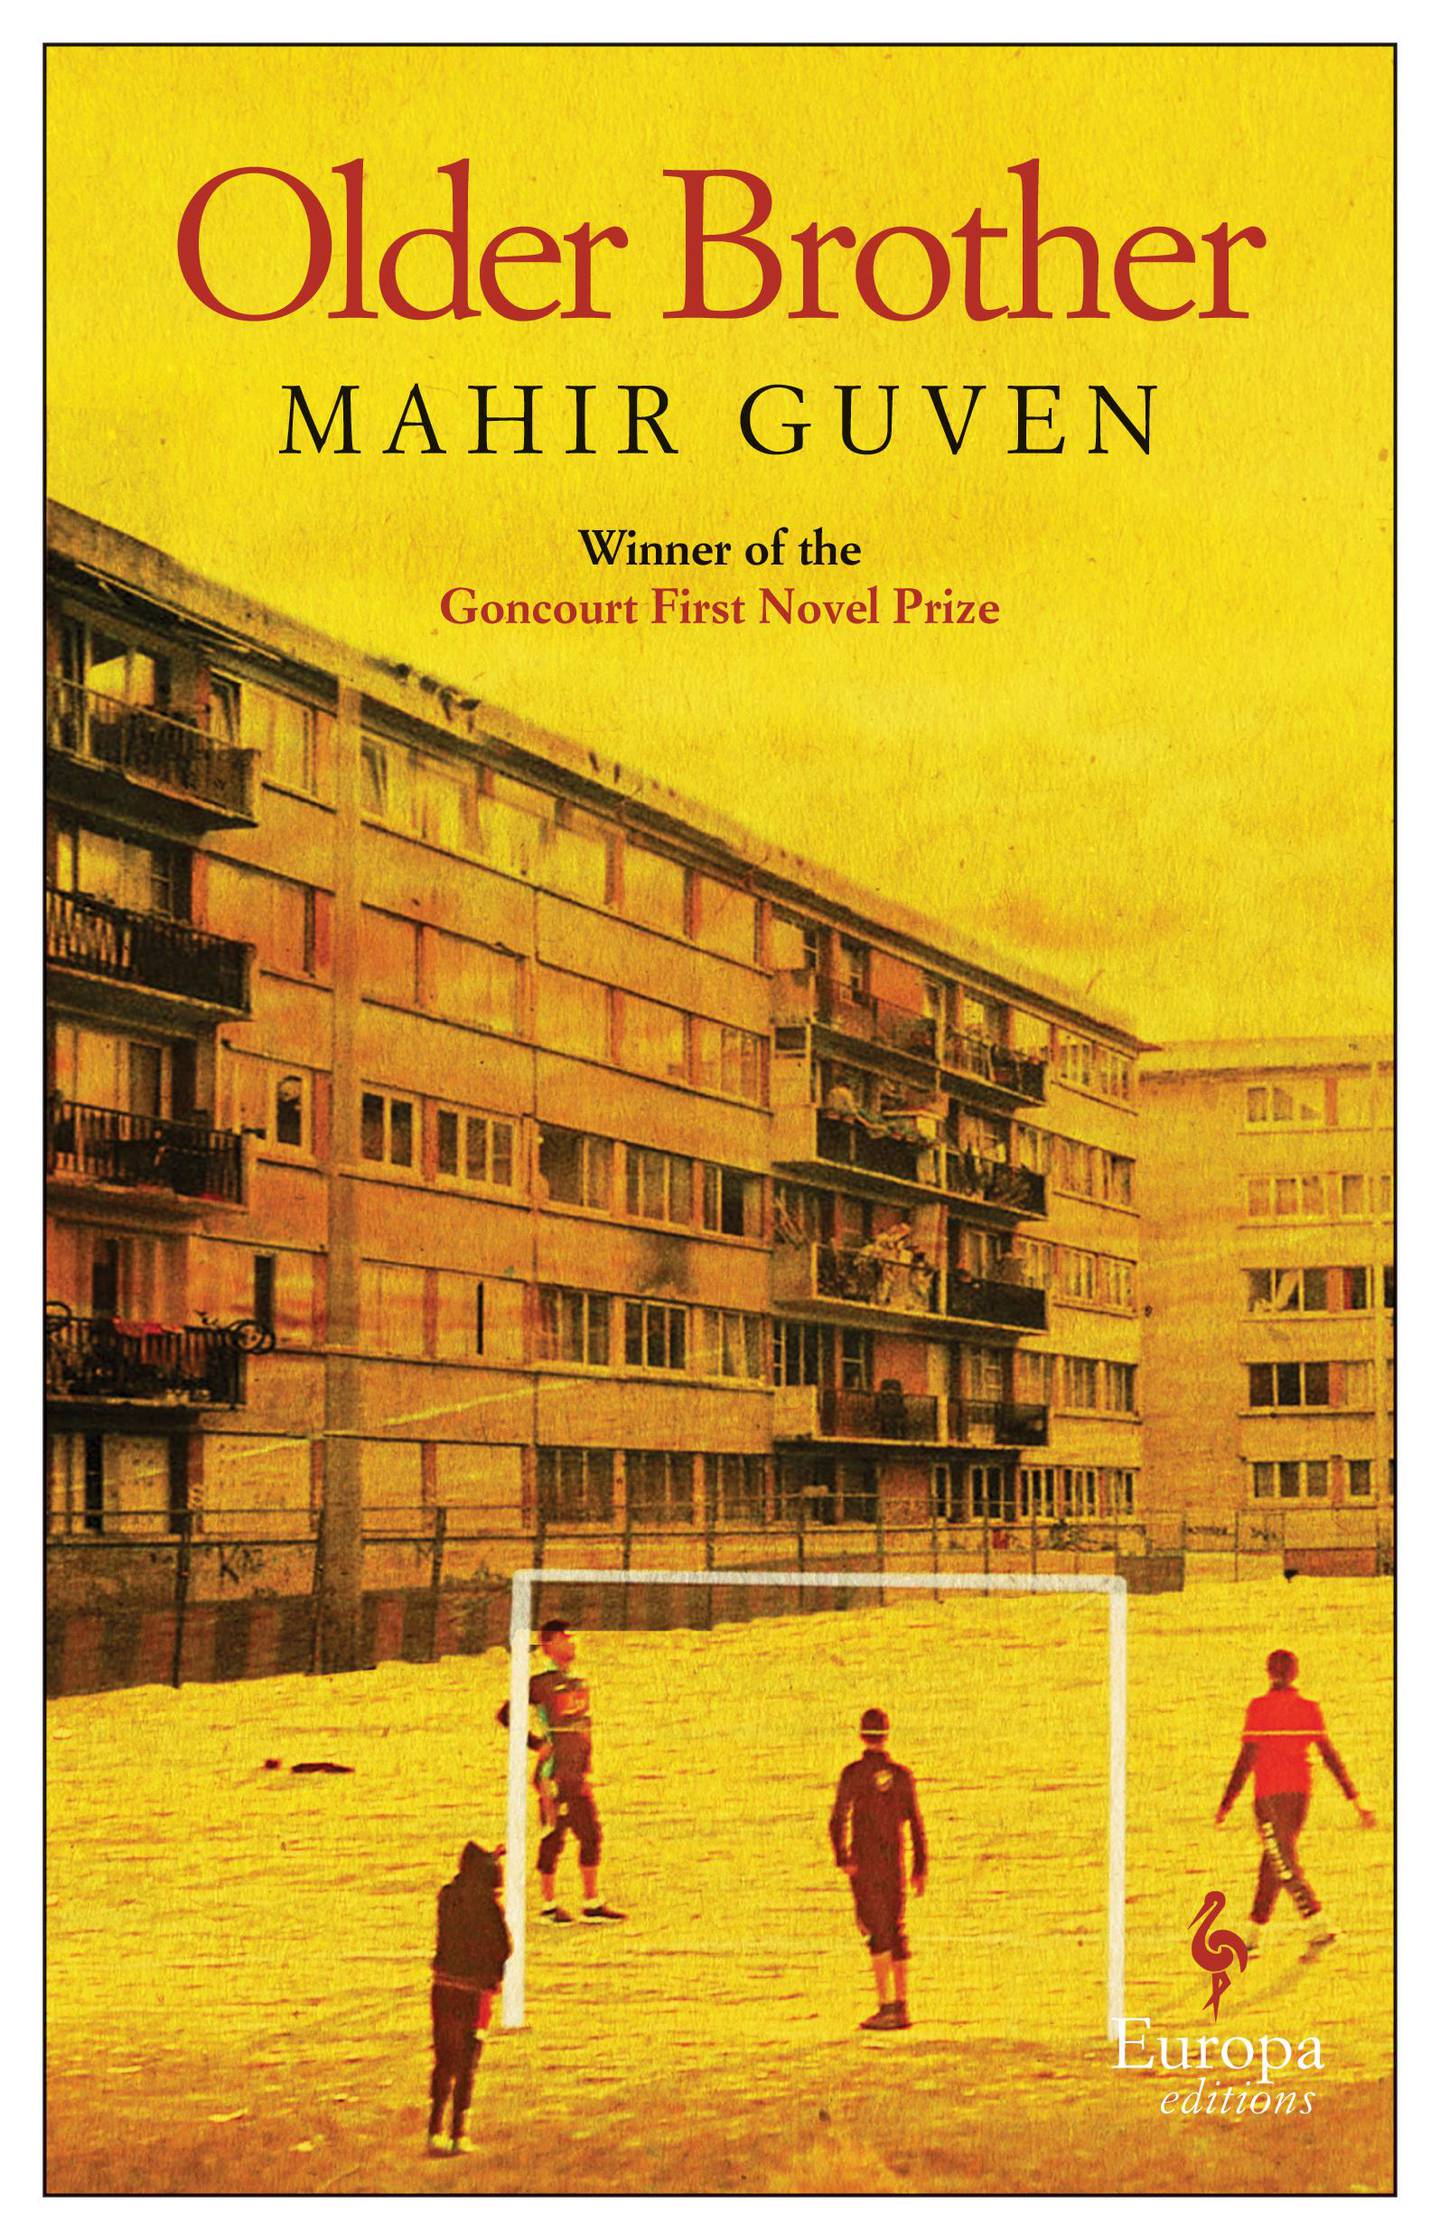 'Older Brother' by Mahir Guven, has helped bring Arabic words into French mainstream literature. 